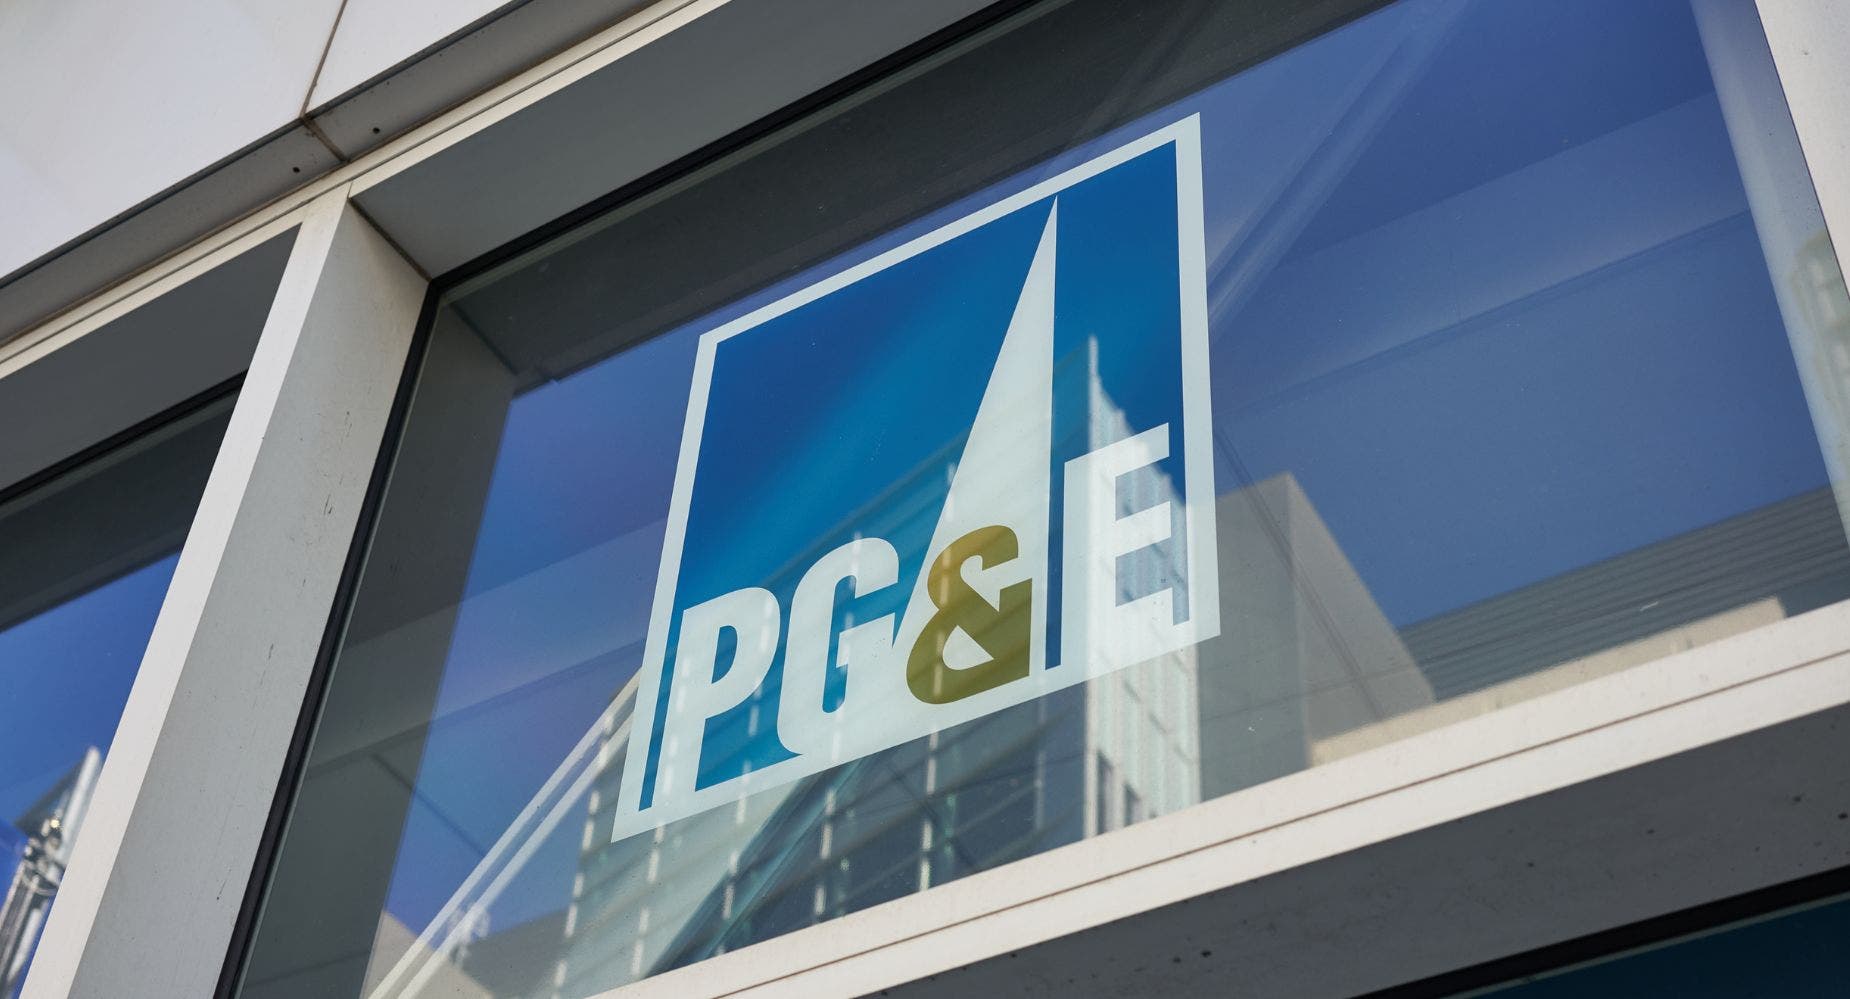 If You Invested $1,000 In PG&E (PCG) Stock At Its COVID-19 Pandemic Low, Here's How Much You'd Have Now